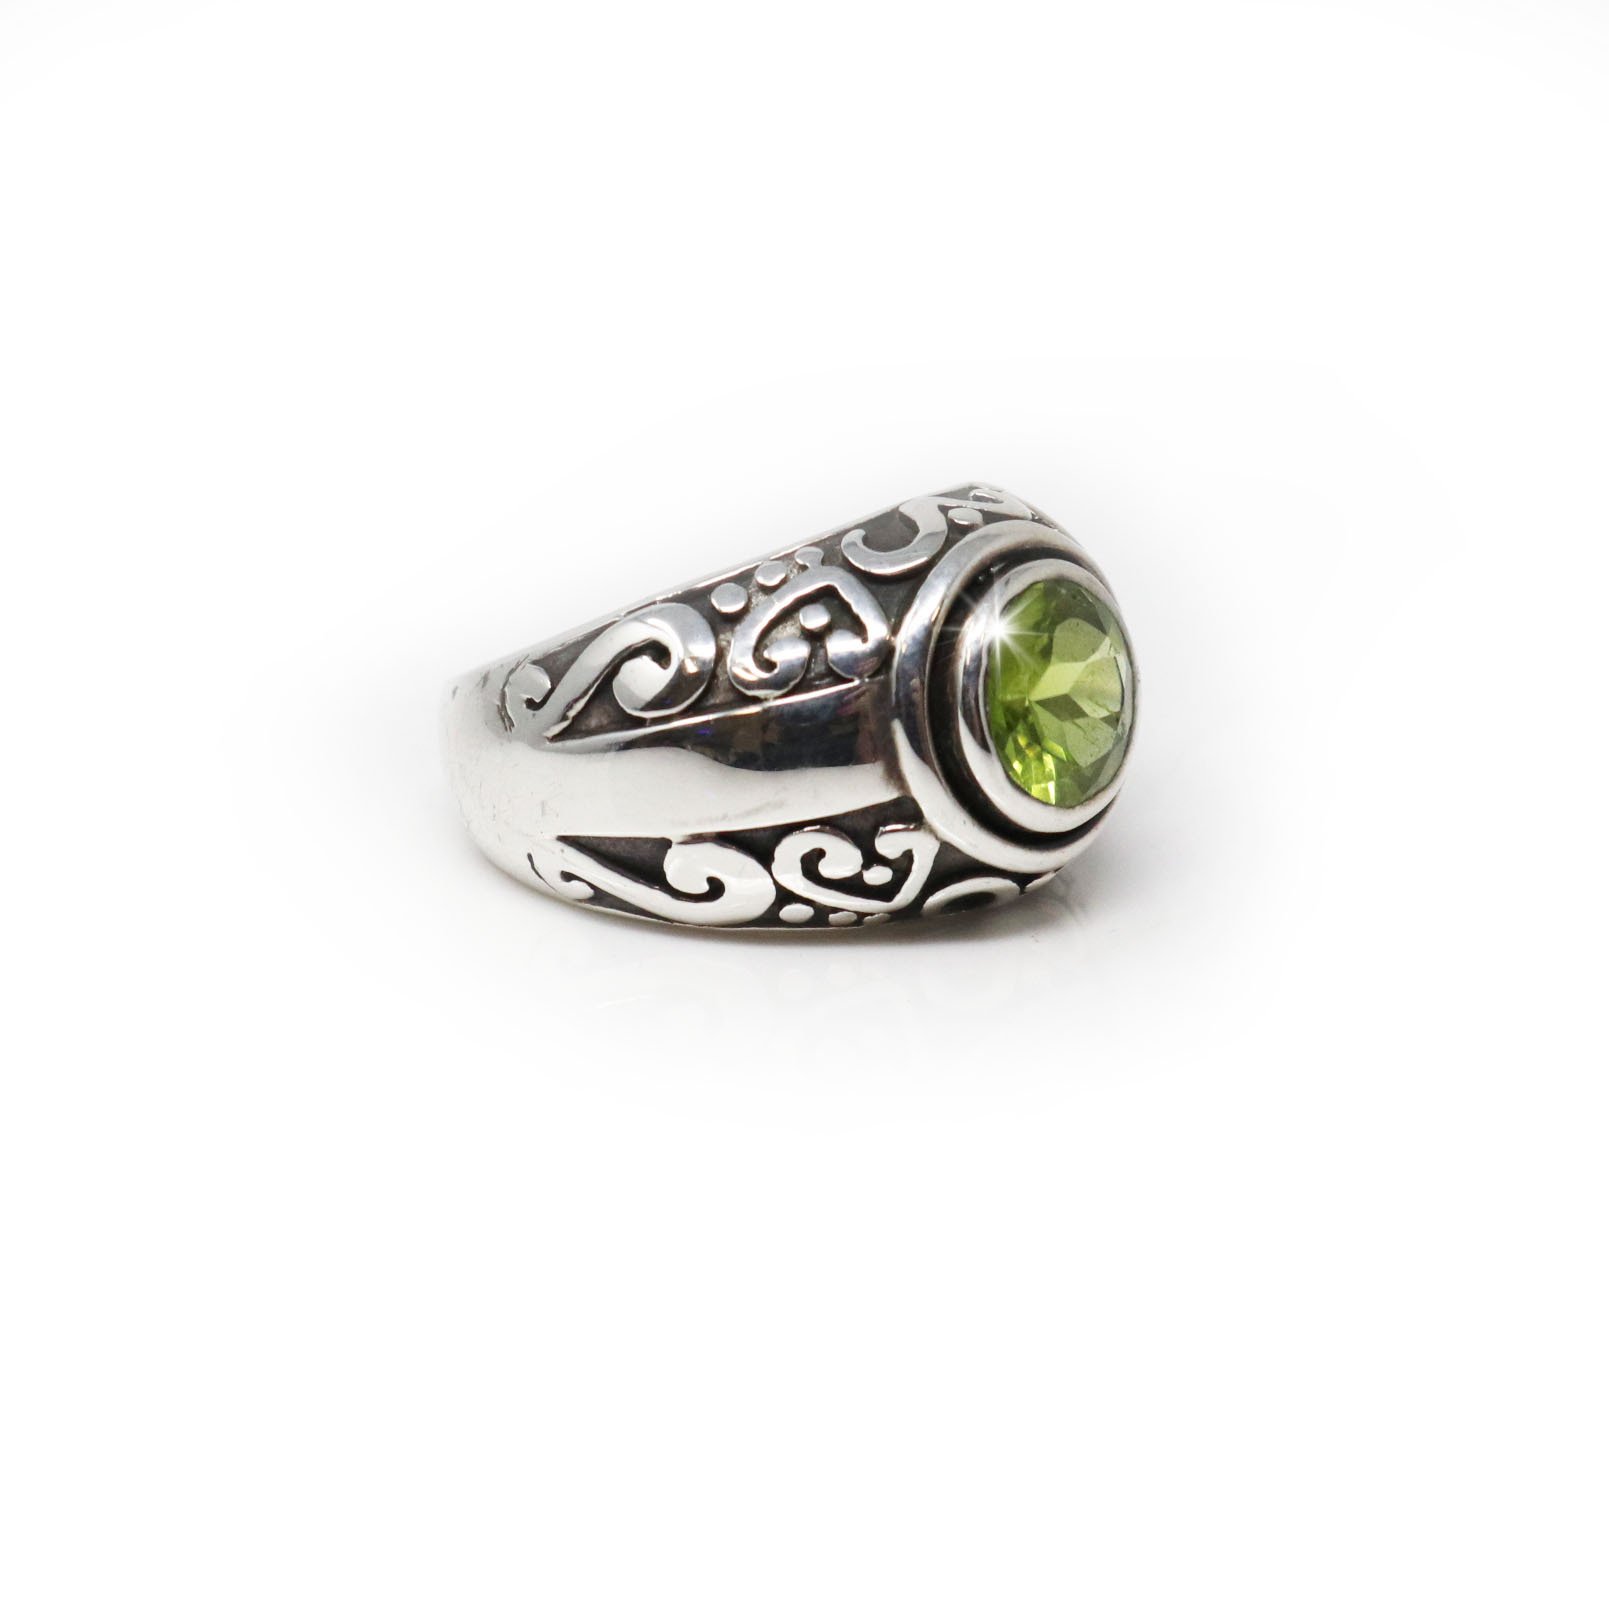 Faceted Round Peridot Ring Size 8 With Oxidized Silver Heart & Swirl Design With Beading